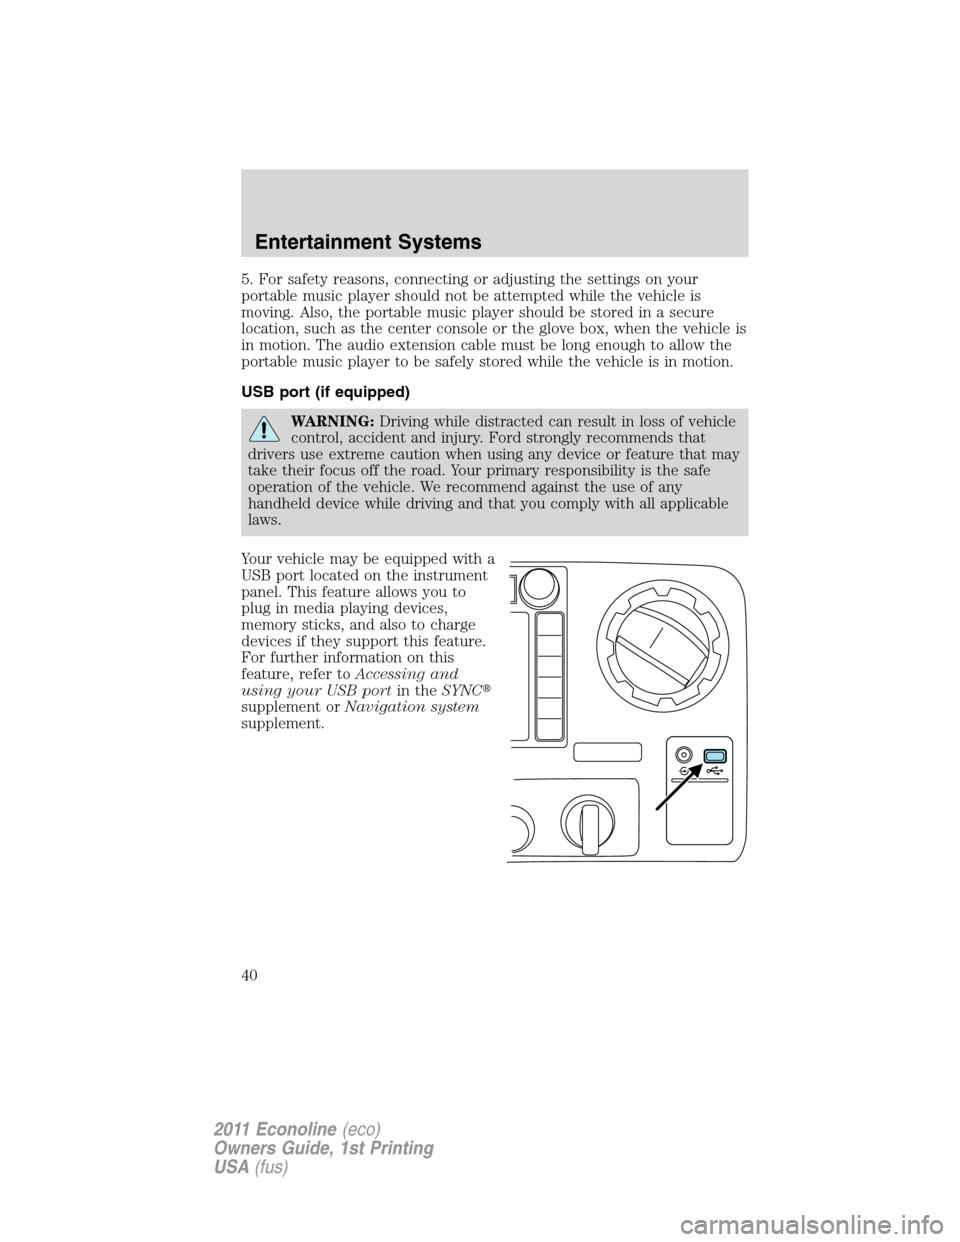 FORD E SERIES 2011 4.G Owners Manual 5. For safety reasons, connecting or adjusting the settings on your
portable music player should not be attempted while the vehicle is
moving. Also, the portable music player should be stored in a sec